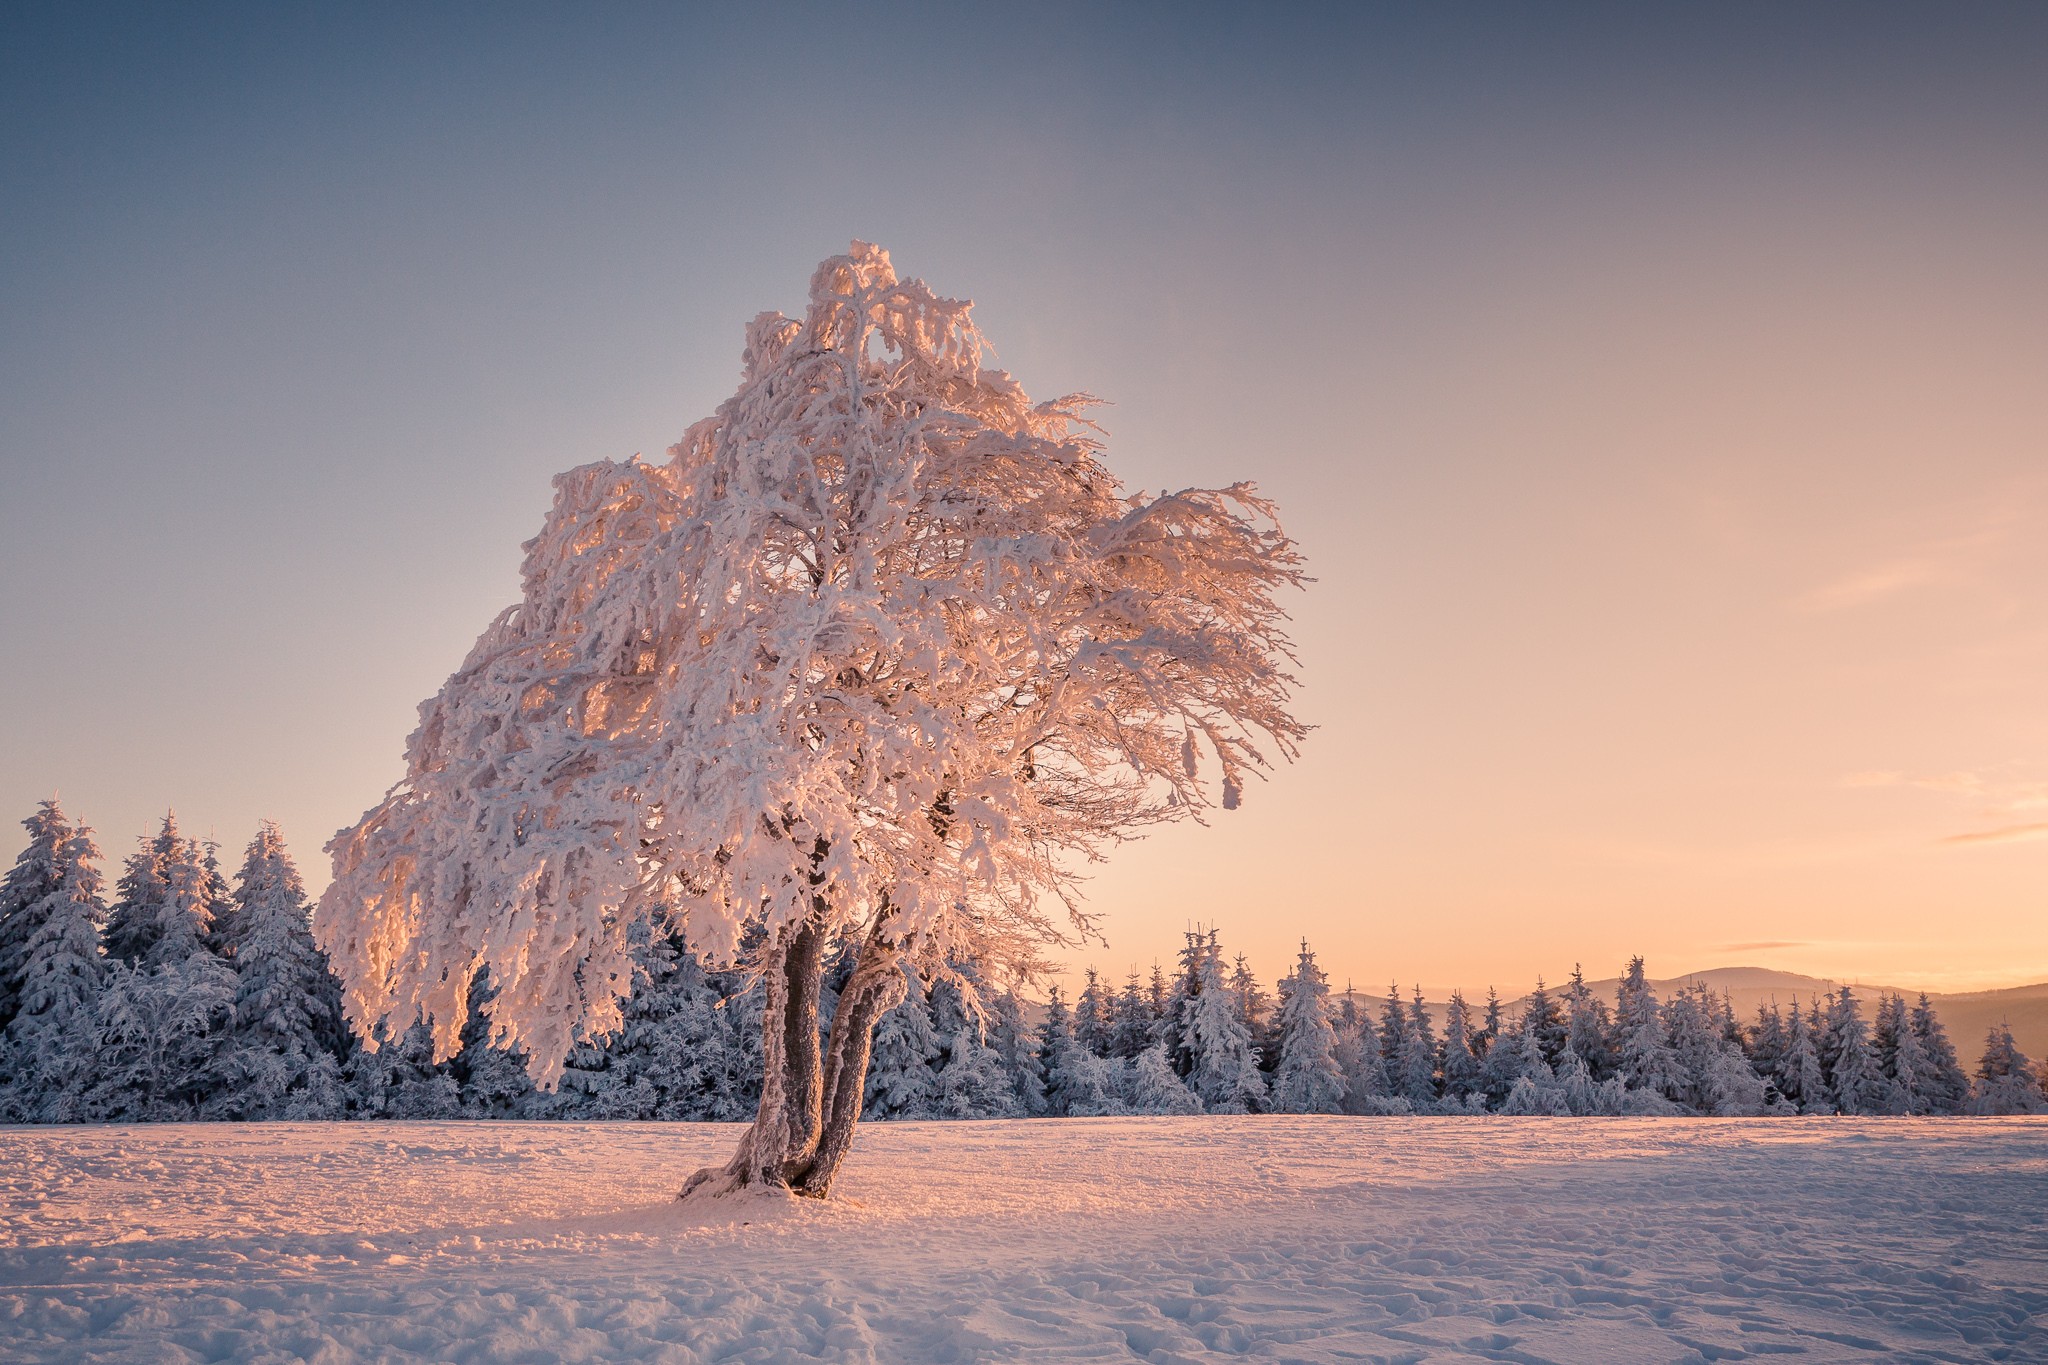 General 2048x1365 landscape winter snow trees cold ice outdoors nature